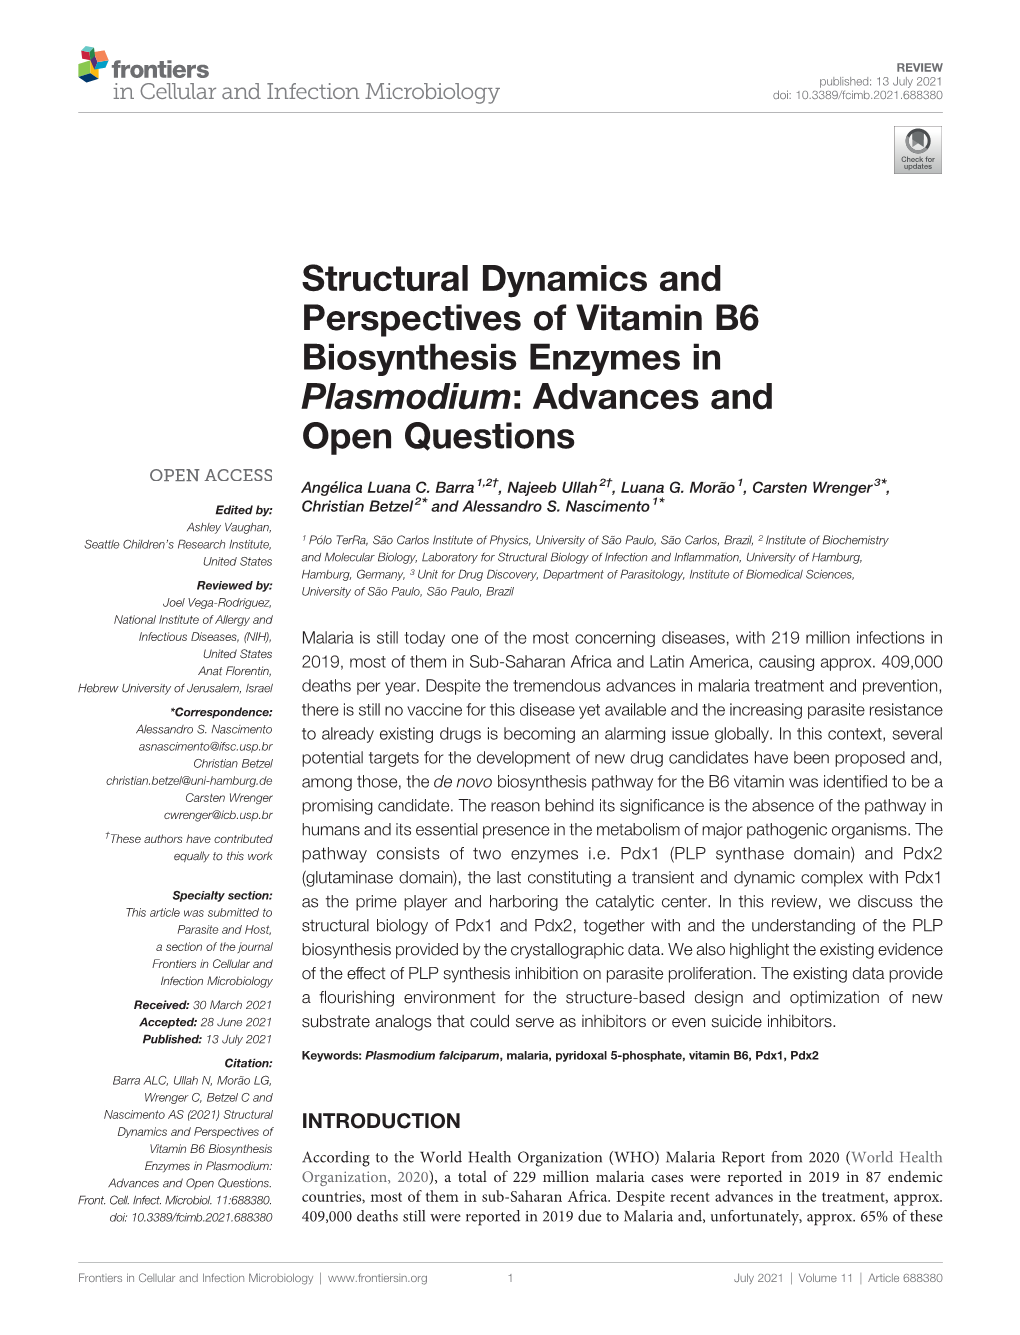 Structural Dynamics and Perspectives of Vitamin B6 Biosynthesis Enzymes in Plasmodium: Advances and Open Questions